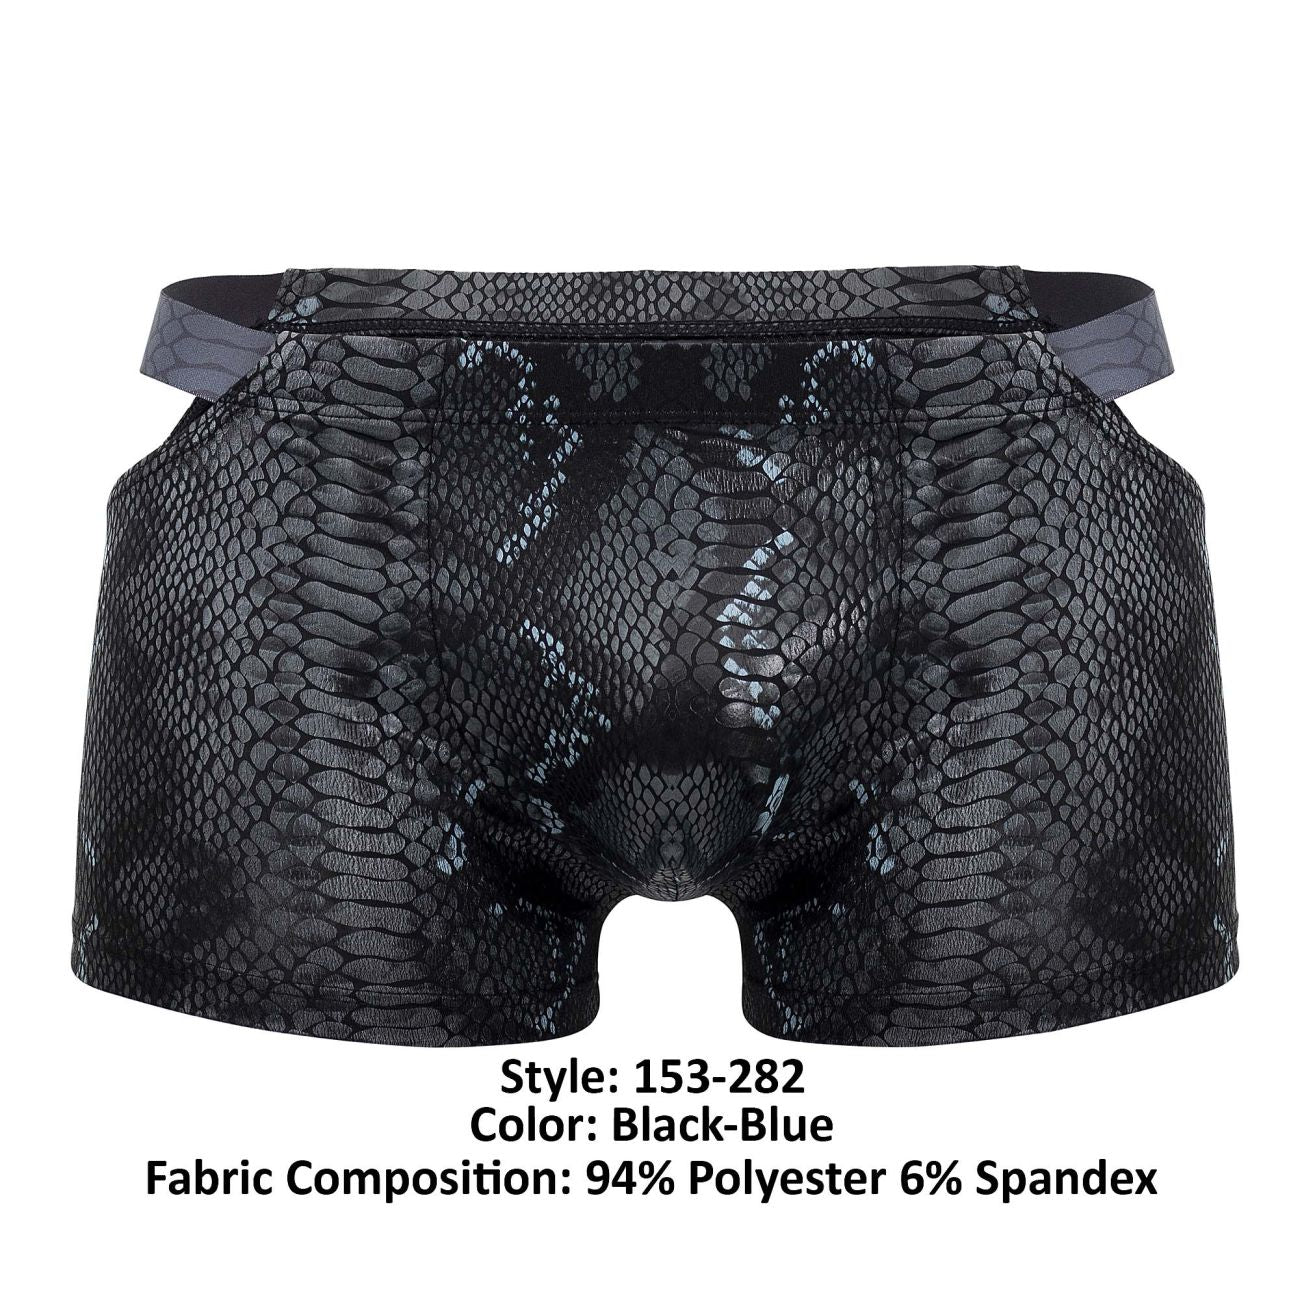 Male Power 153-282 S-naked Pouch Short Black-Blue